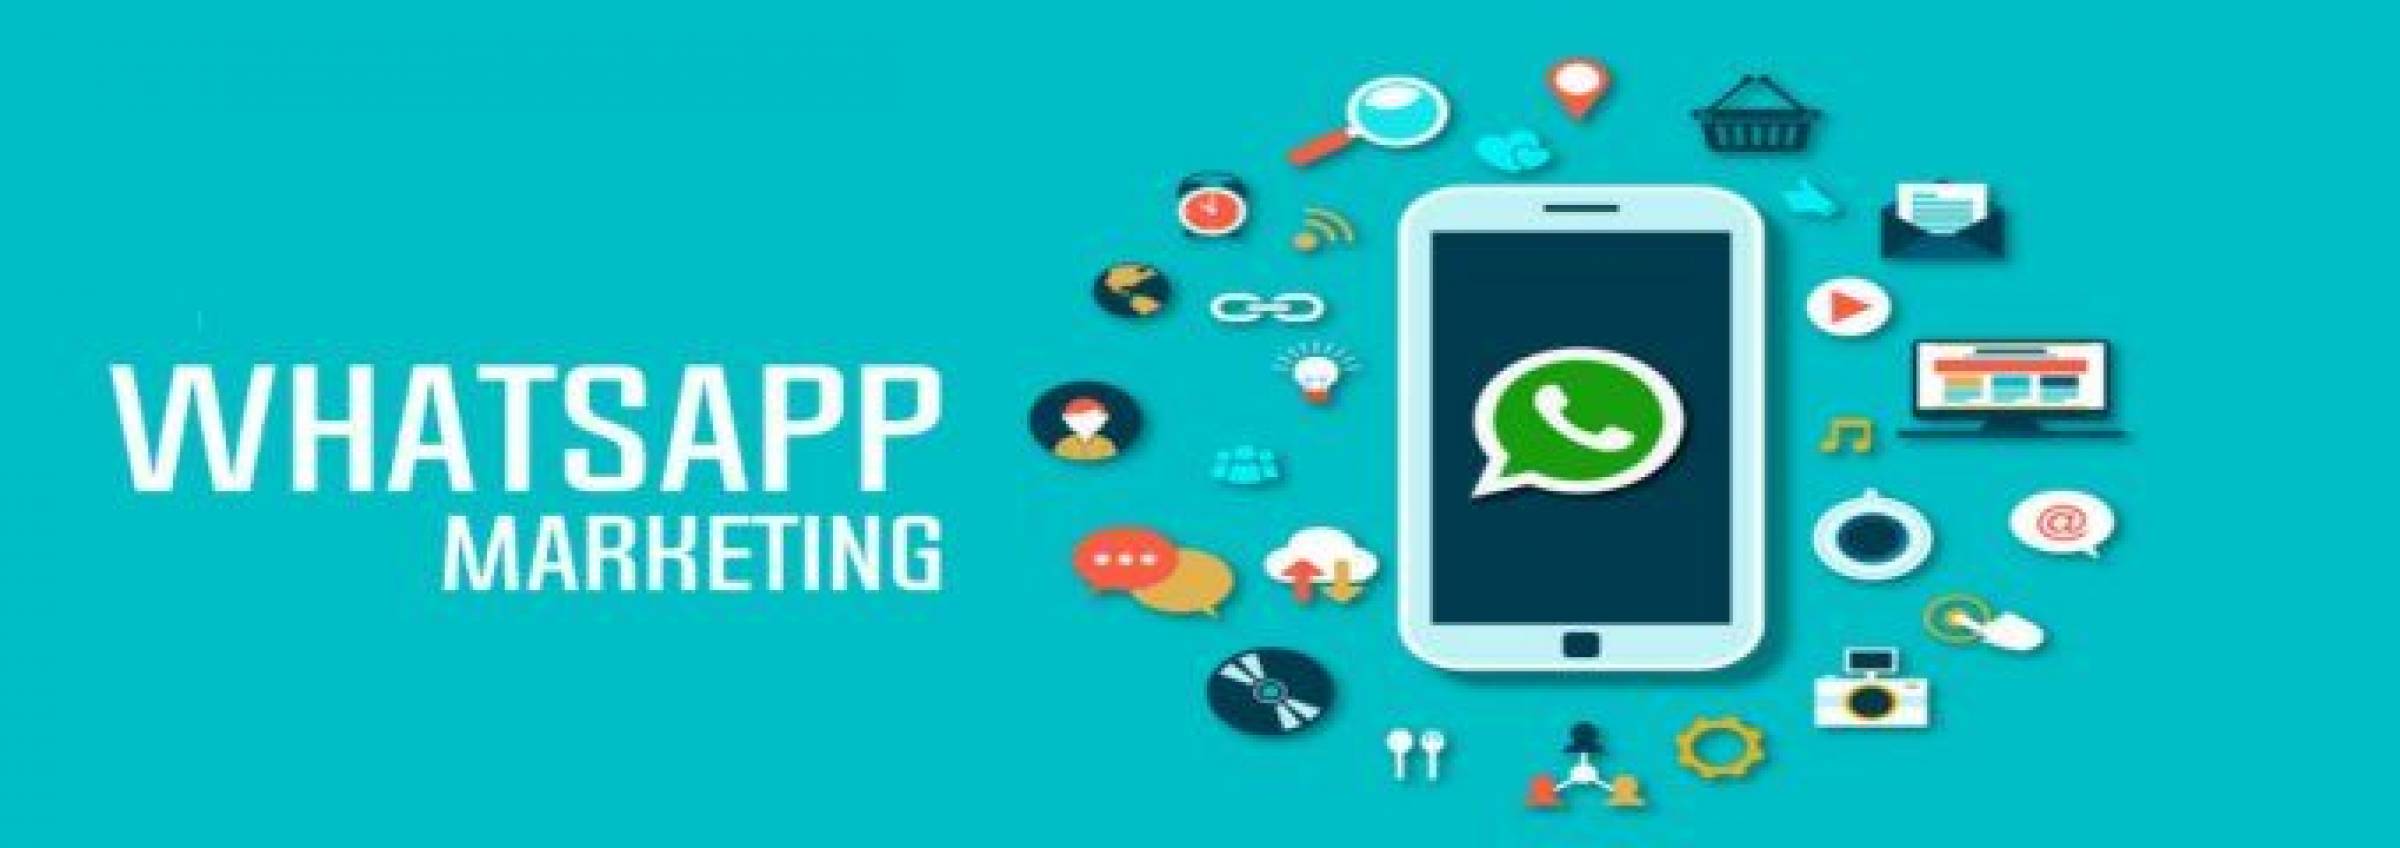 WhatsApp Marketing Services 0.05 Per Mobile Number